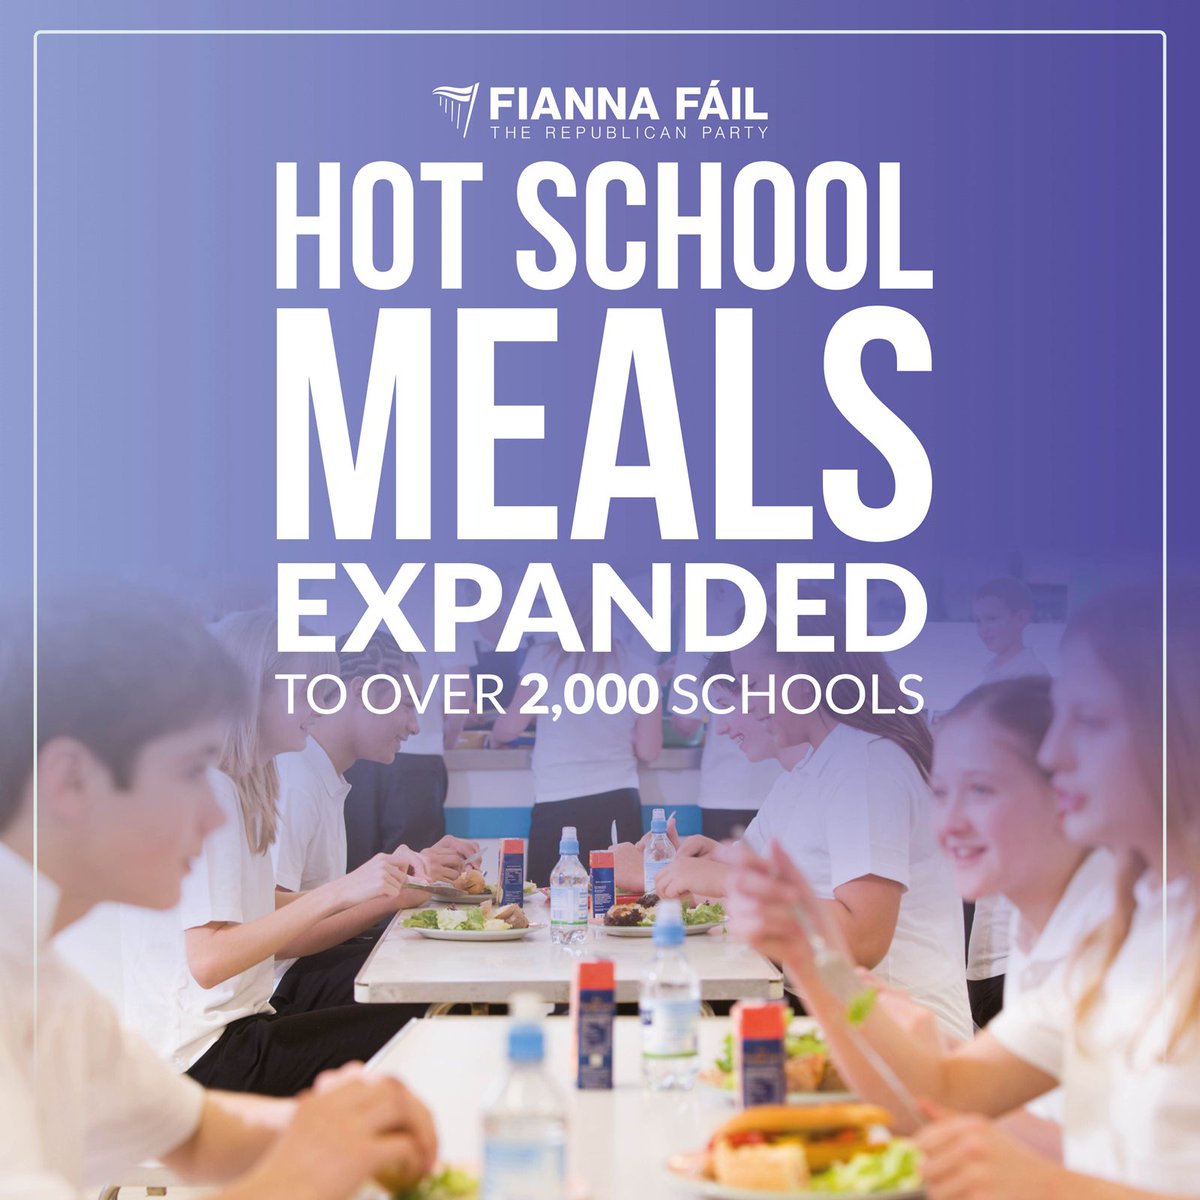 This means an additional 150,000 children will benefit, bringing the total number of pupils receiving a nutritious hot meal each school day to 316,000. The expansion of the Hot School Meals programme has been a priority for Fianna Fáil in Government and Minister Norma Foley.